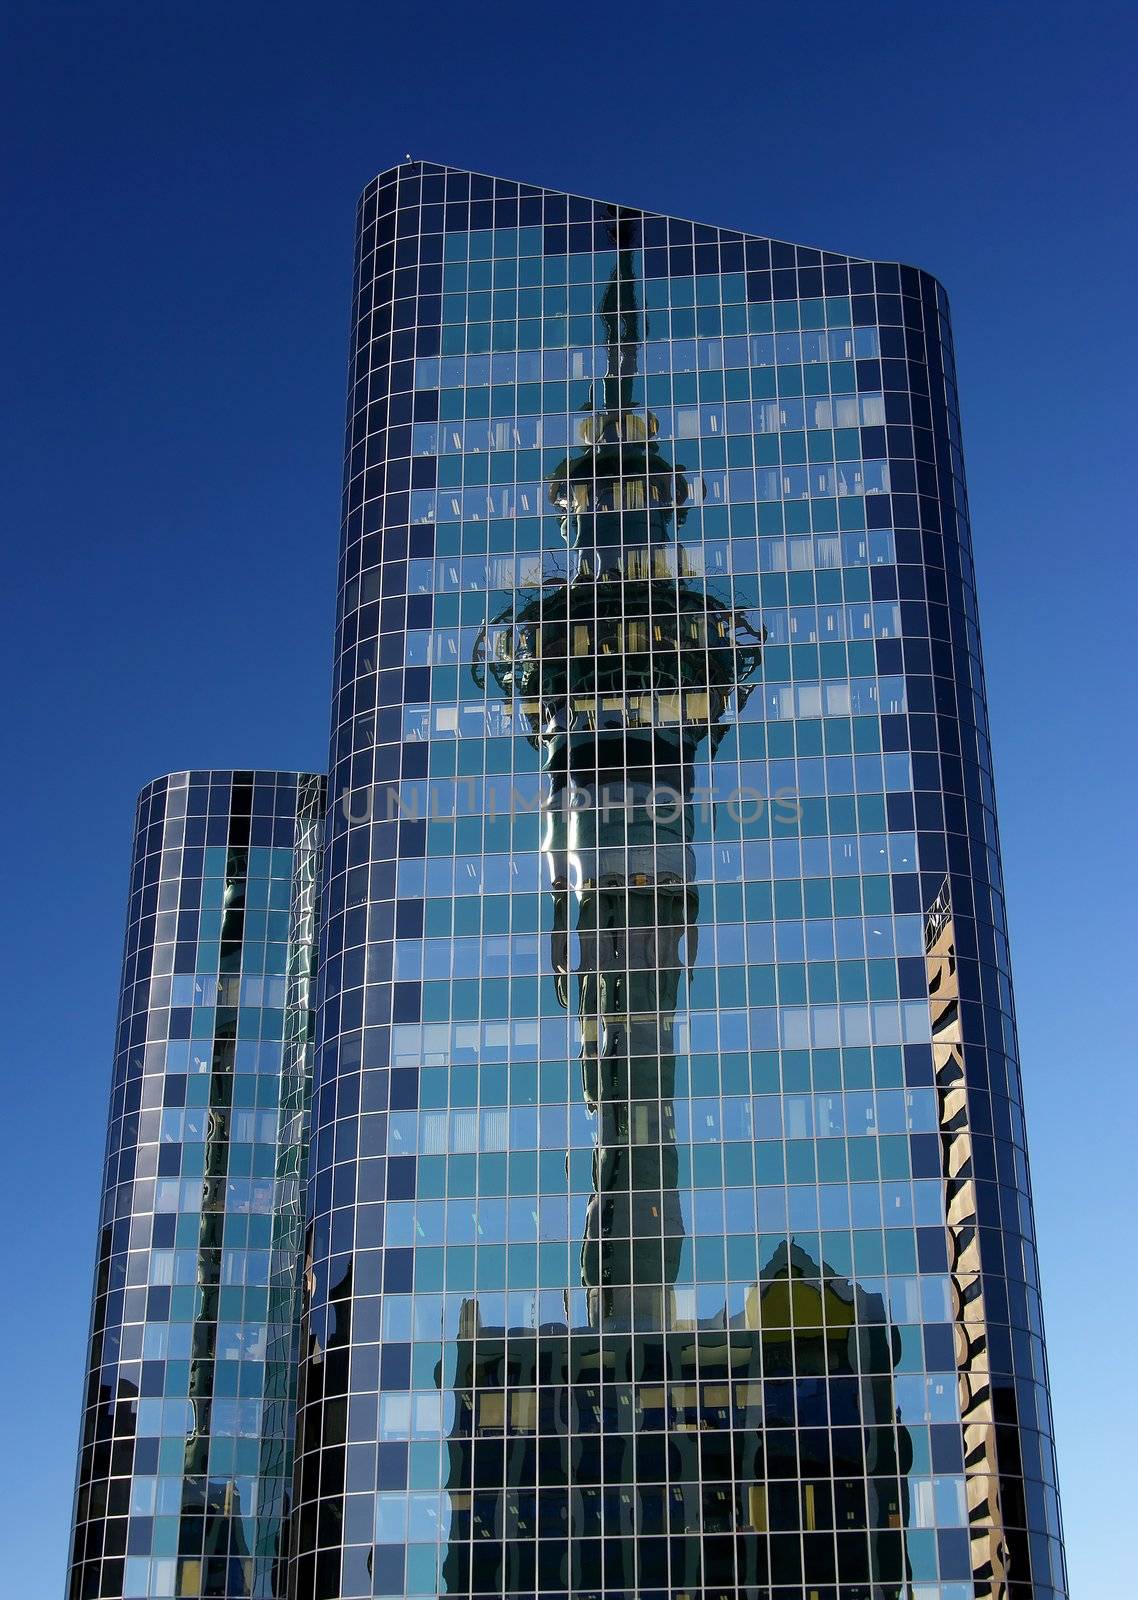 Two high rise office buildings in Auckland City with the Sky Tower reflected in the windows.

